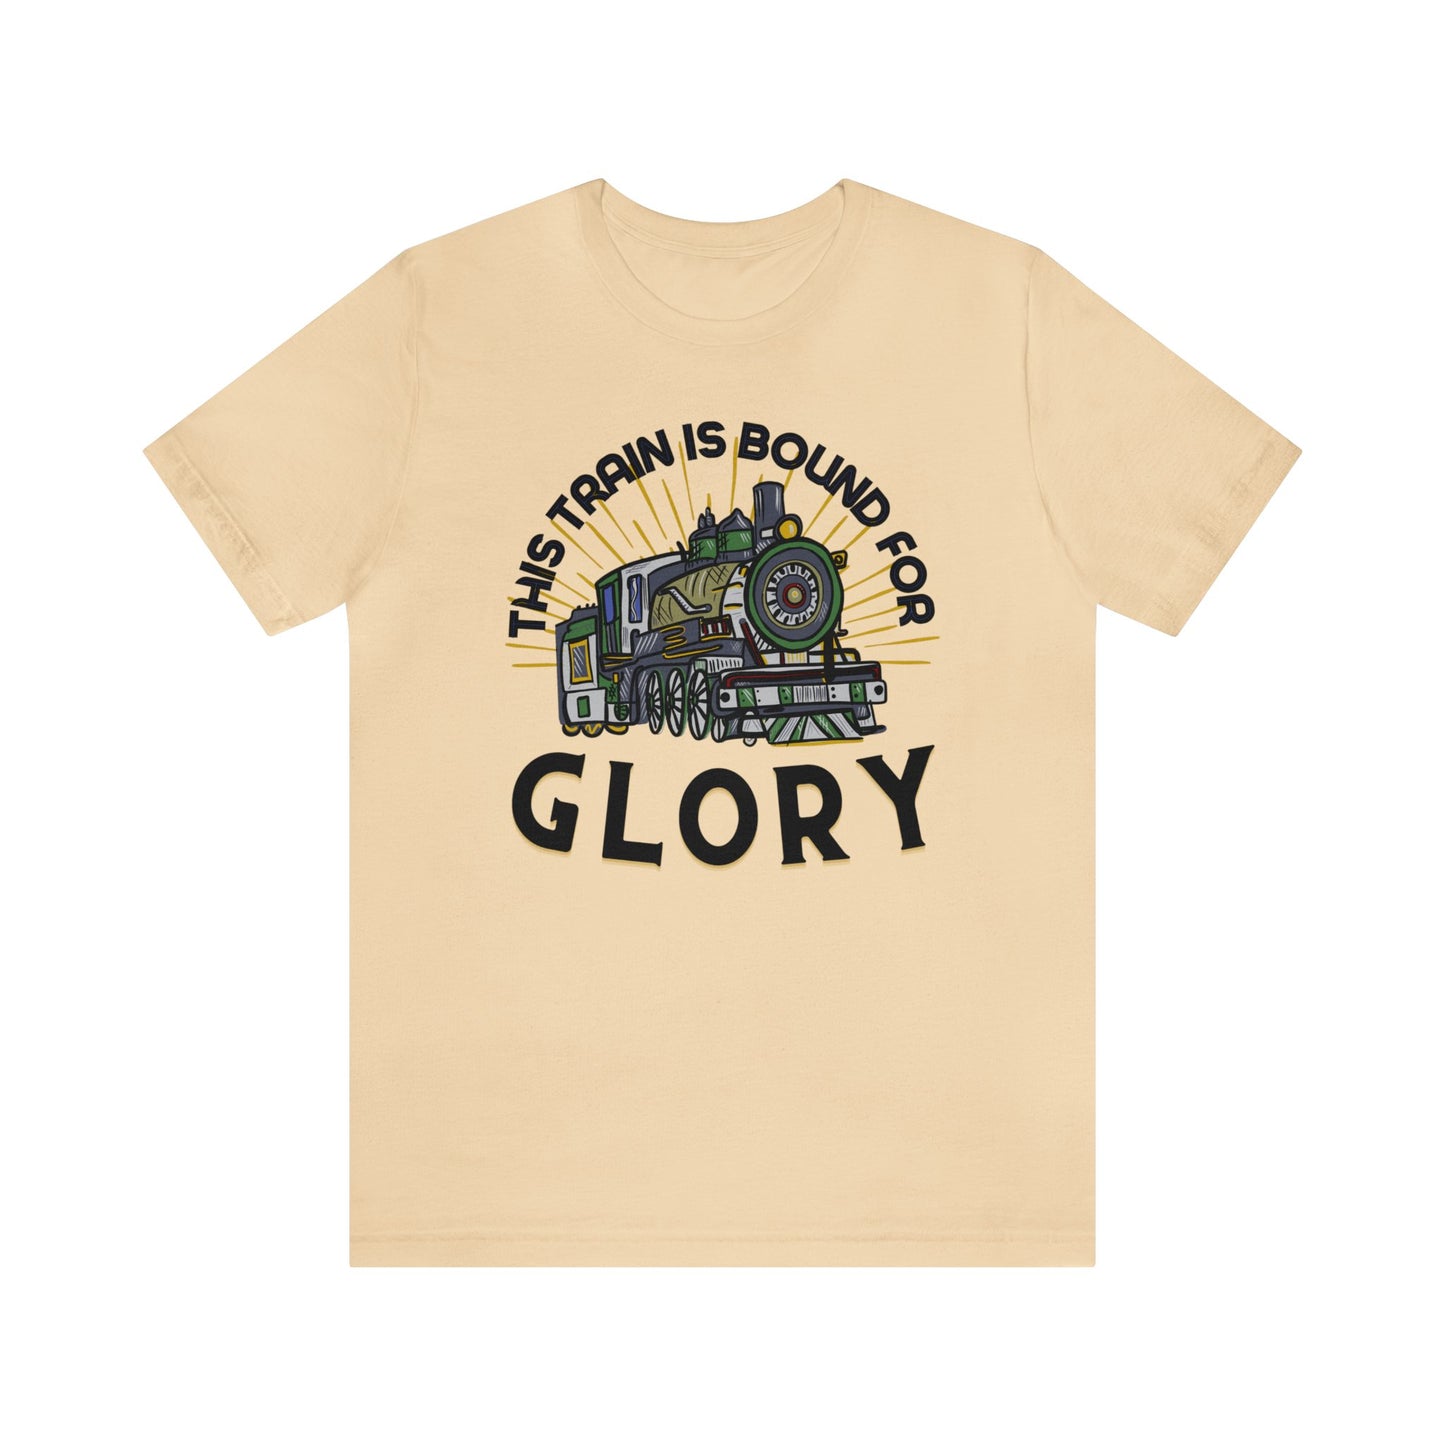 This Train is Bound For Glory (Green Pastures Apparel)